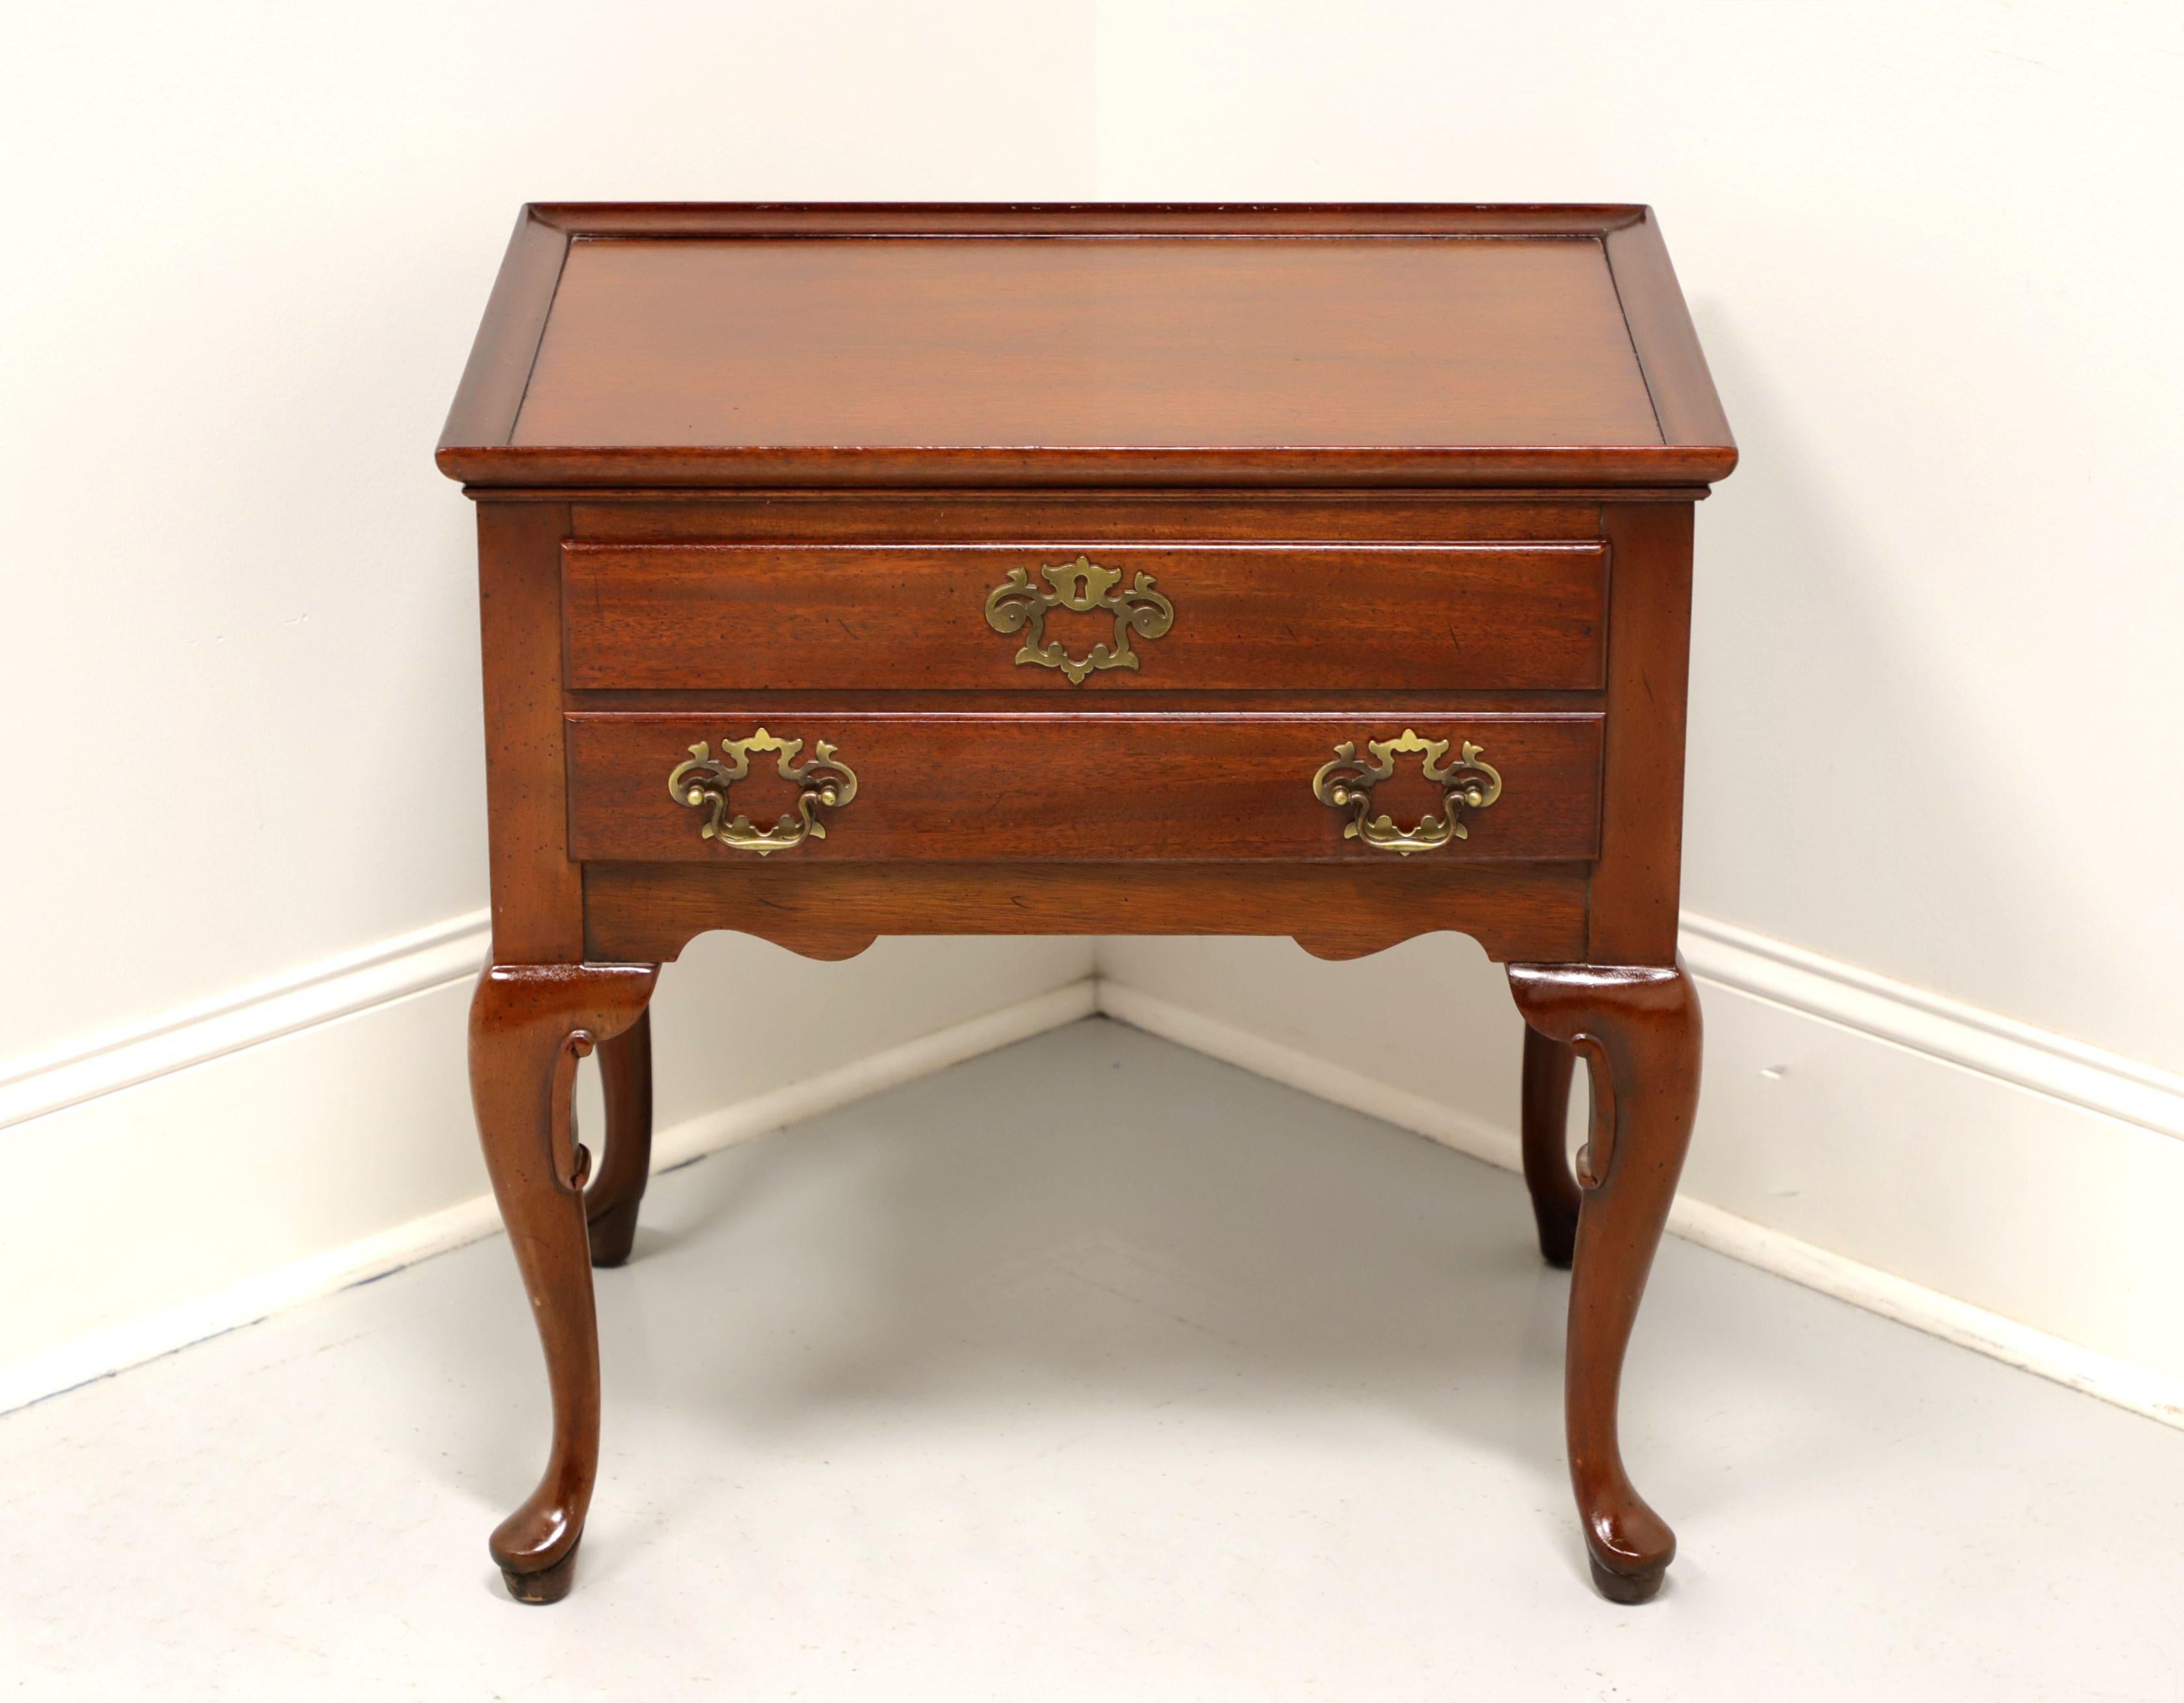 A Queen Anne style nightstand or accent side table by Hickory Chair, from their James River Collection. Solid mahogany with brass hardware. Features one dovetail drawer with faux keyhole escutcheon, tapered legs and pad feet. Made in the USA, in the